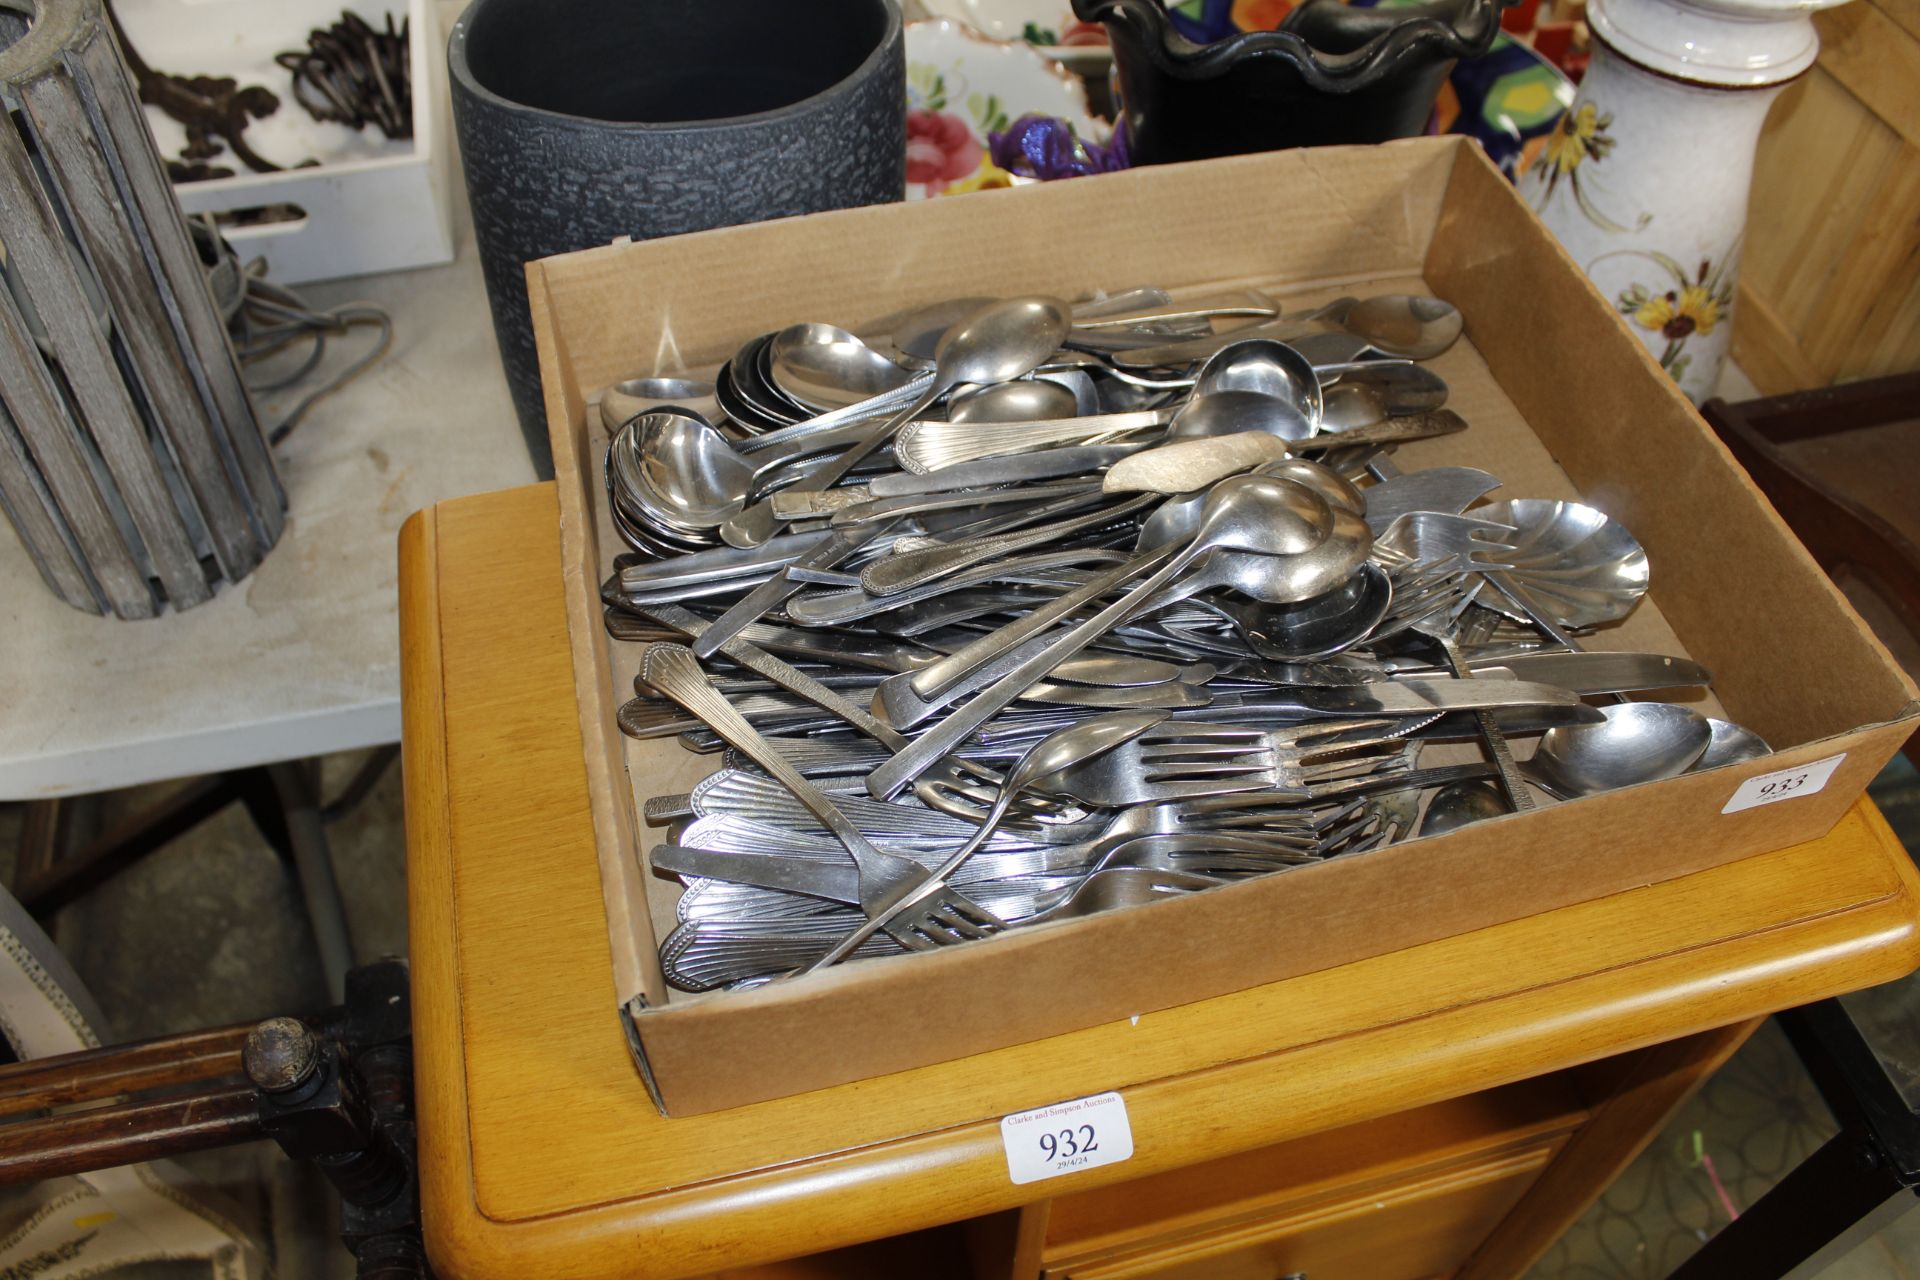 A quantity of various cutlery